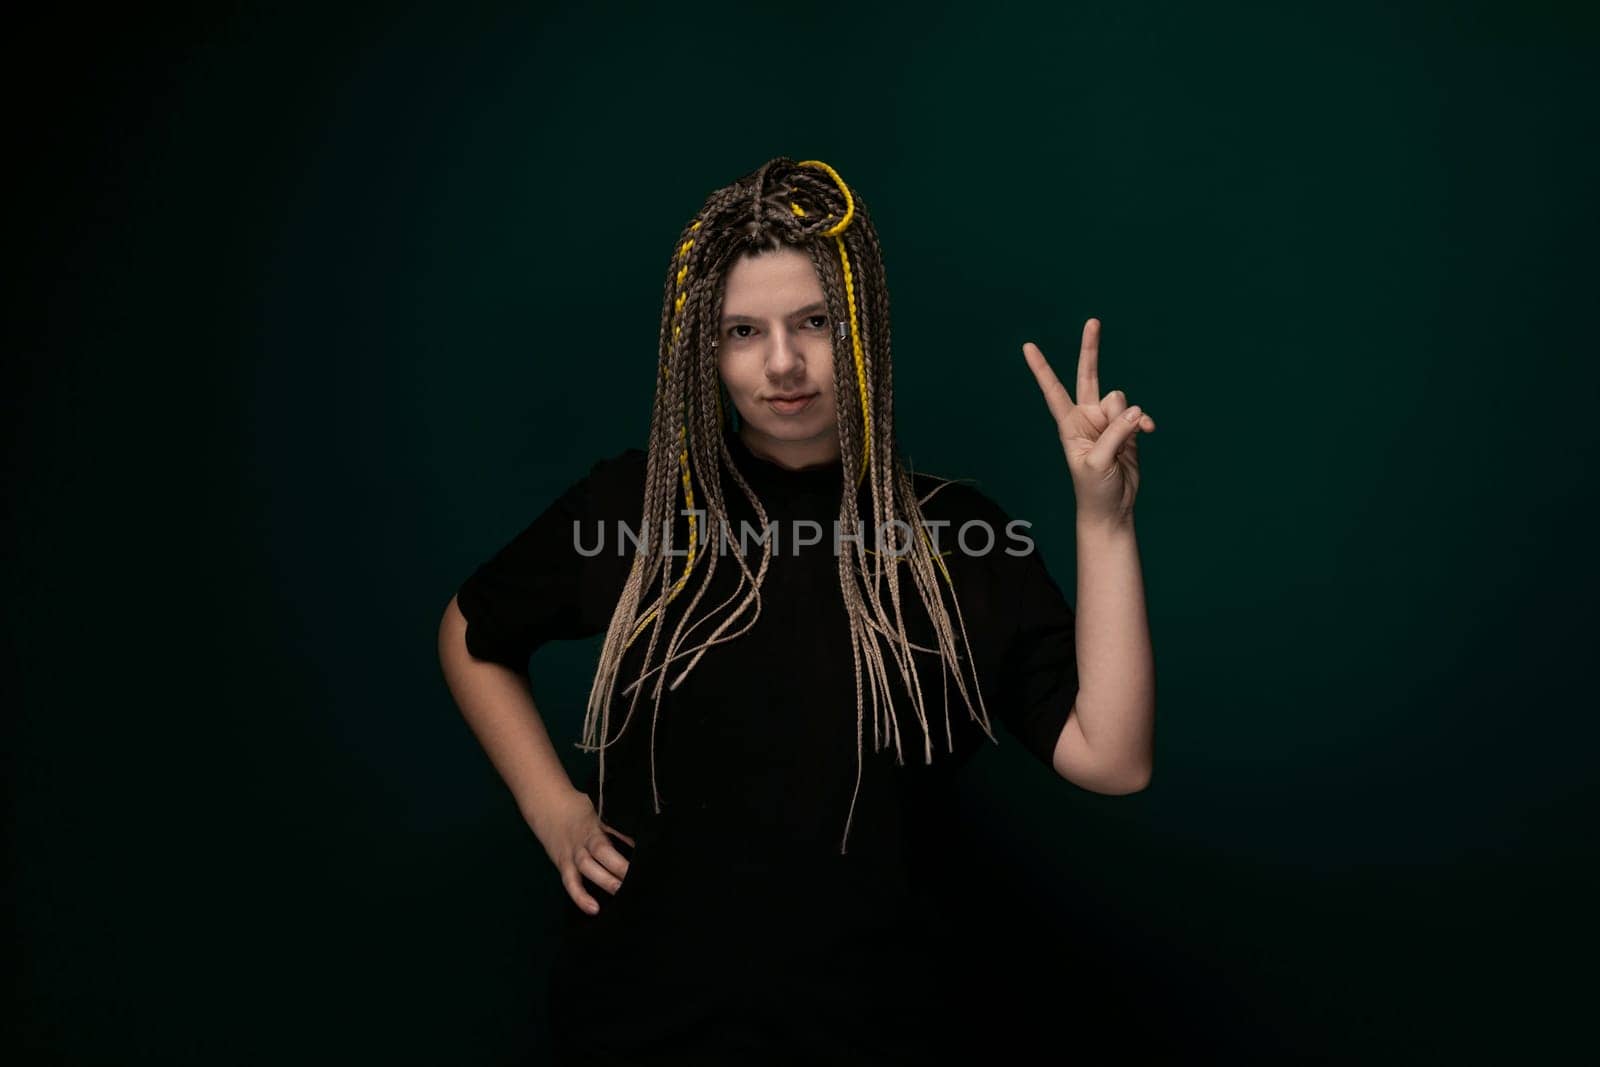 Woman With Dreadlocks Making a Peace Sign by TRMK